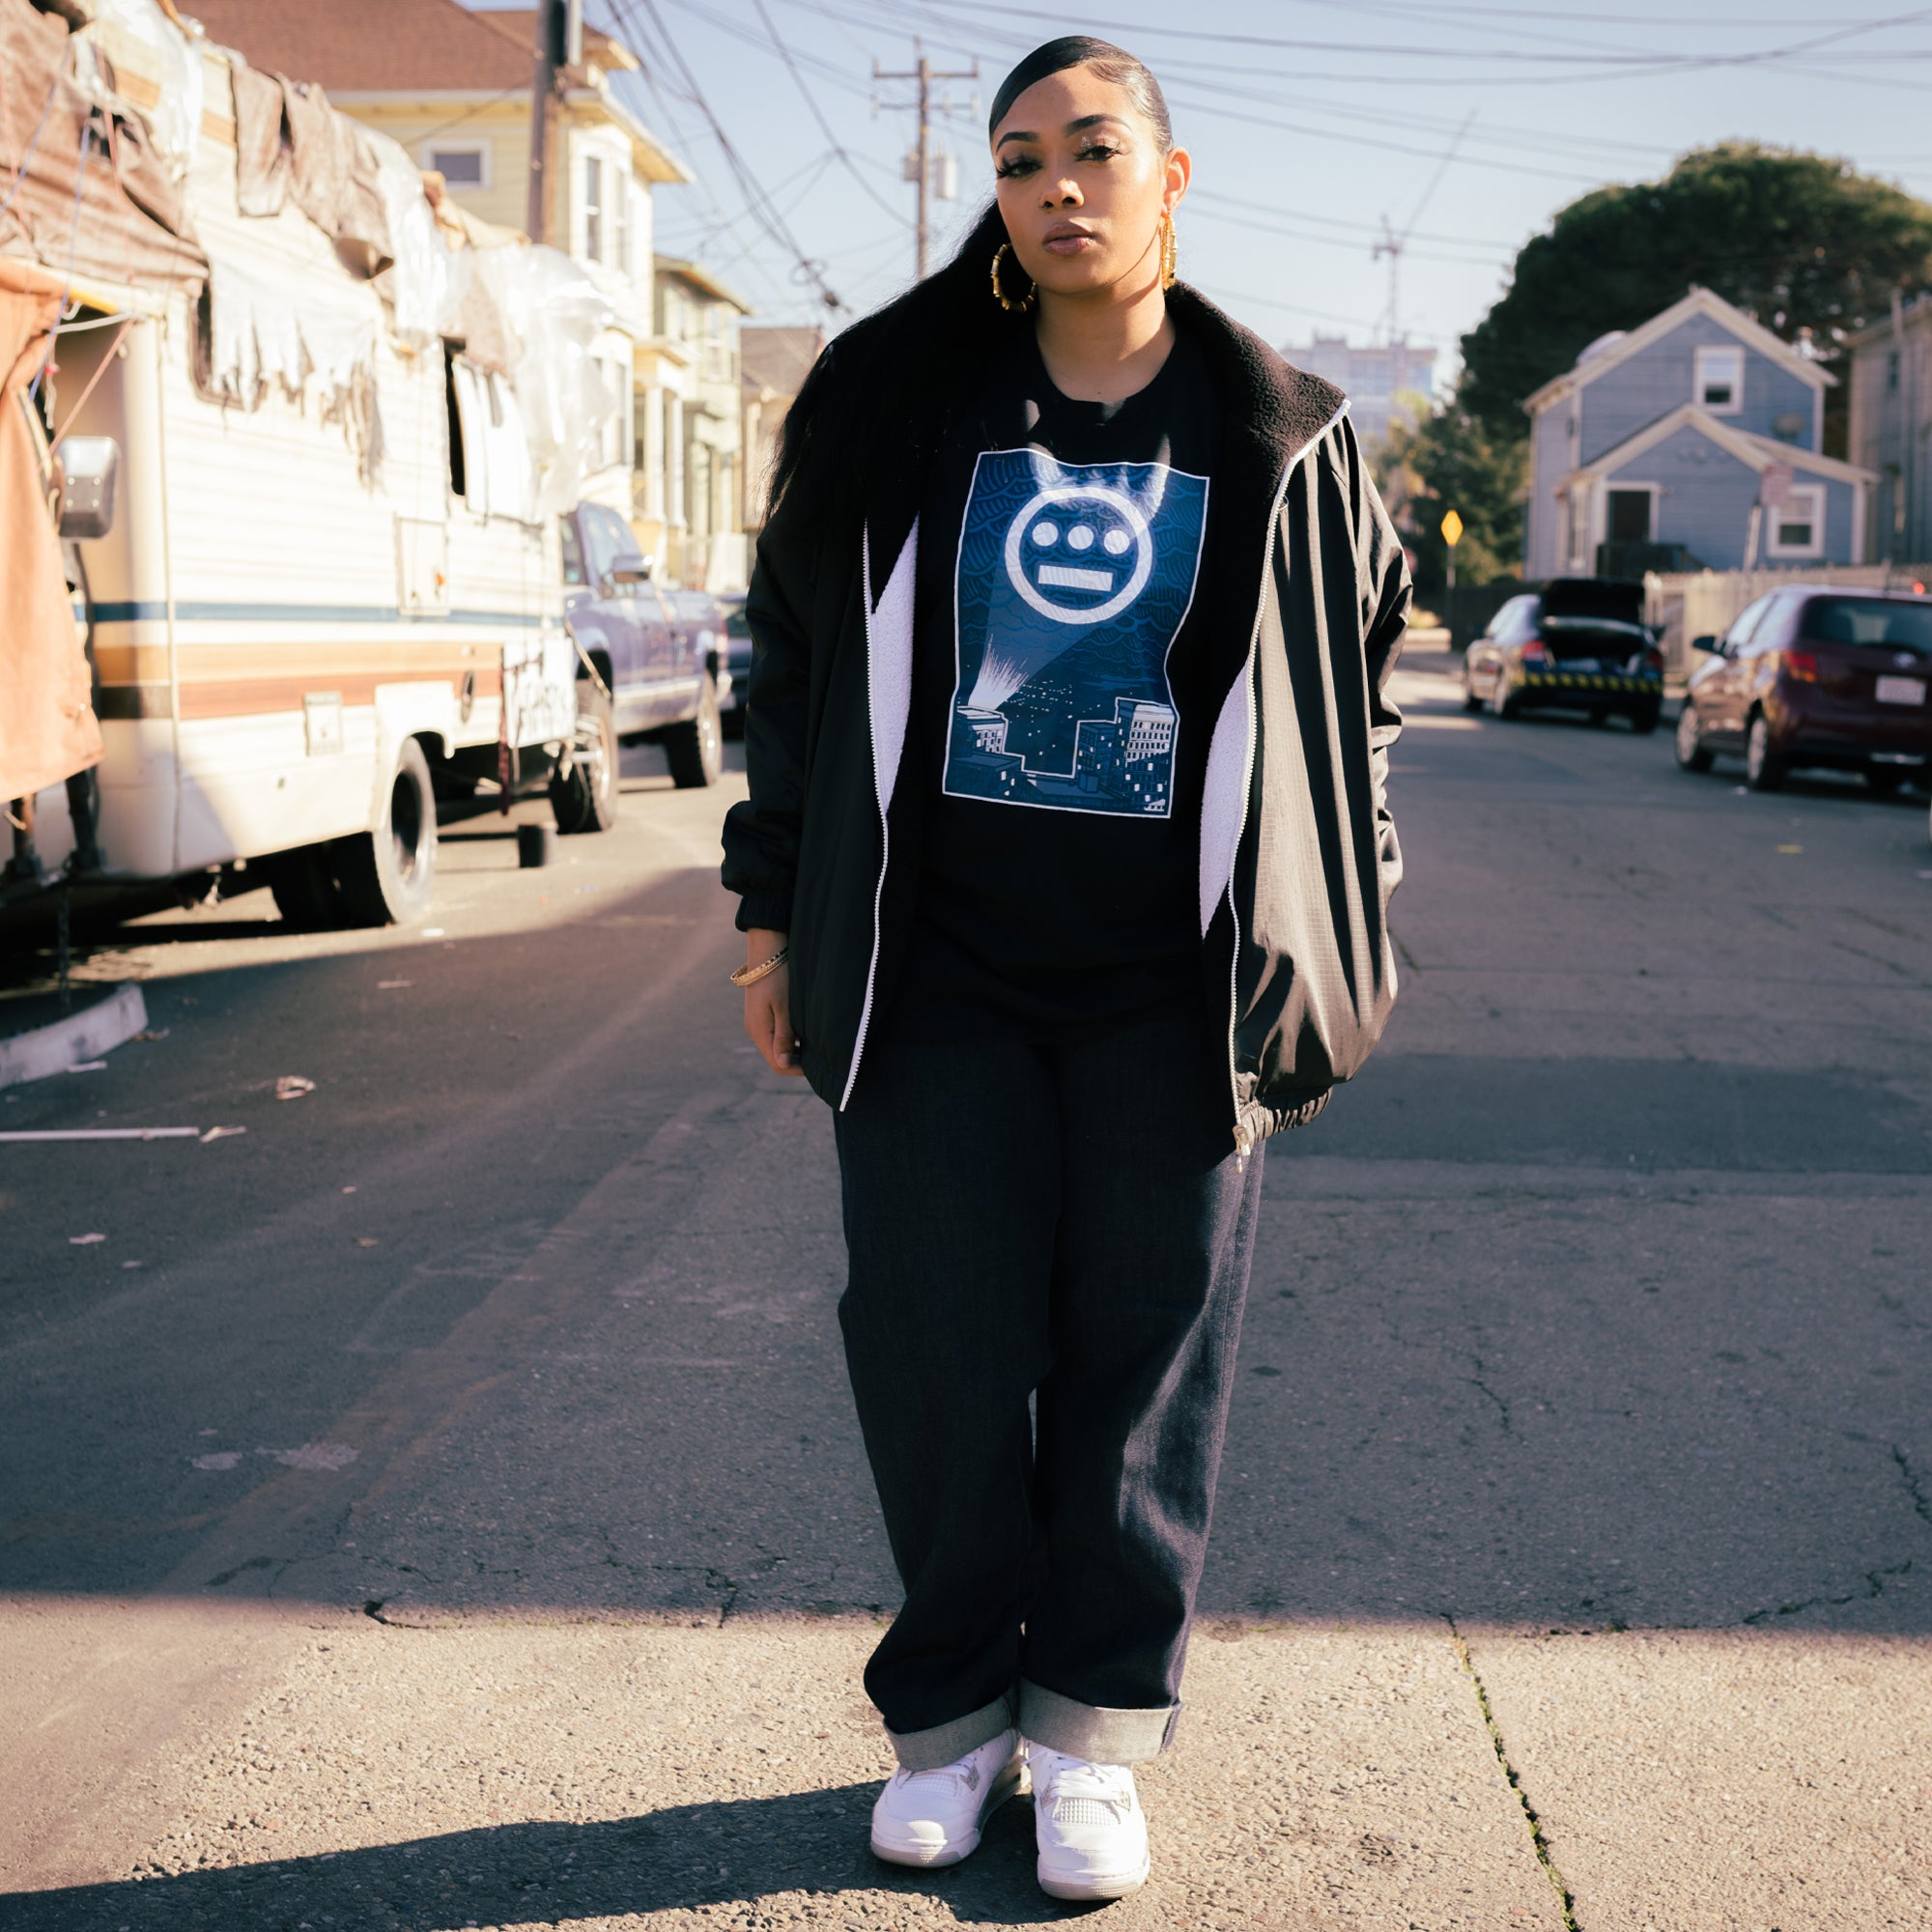 Female model in the middle of the street wearing a navy t-shirt with a graphic of Hiero logo spotlight signal in Oakland’s night sky above buildings.